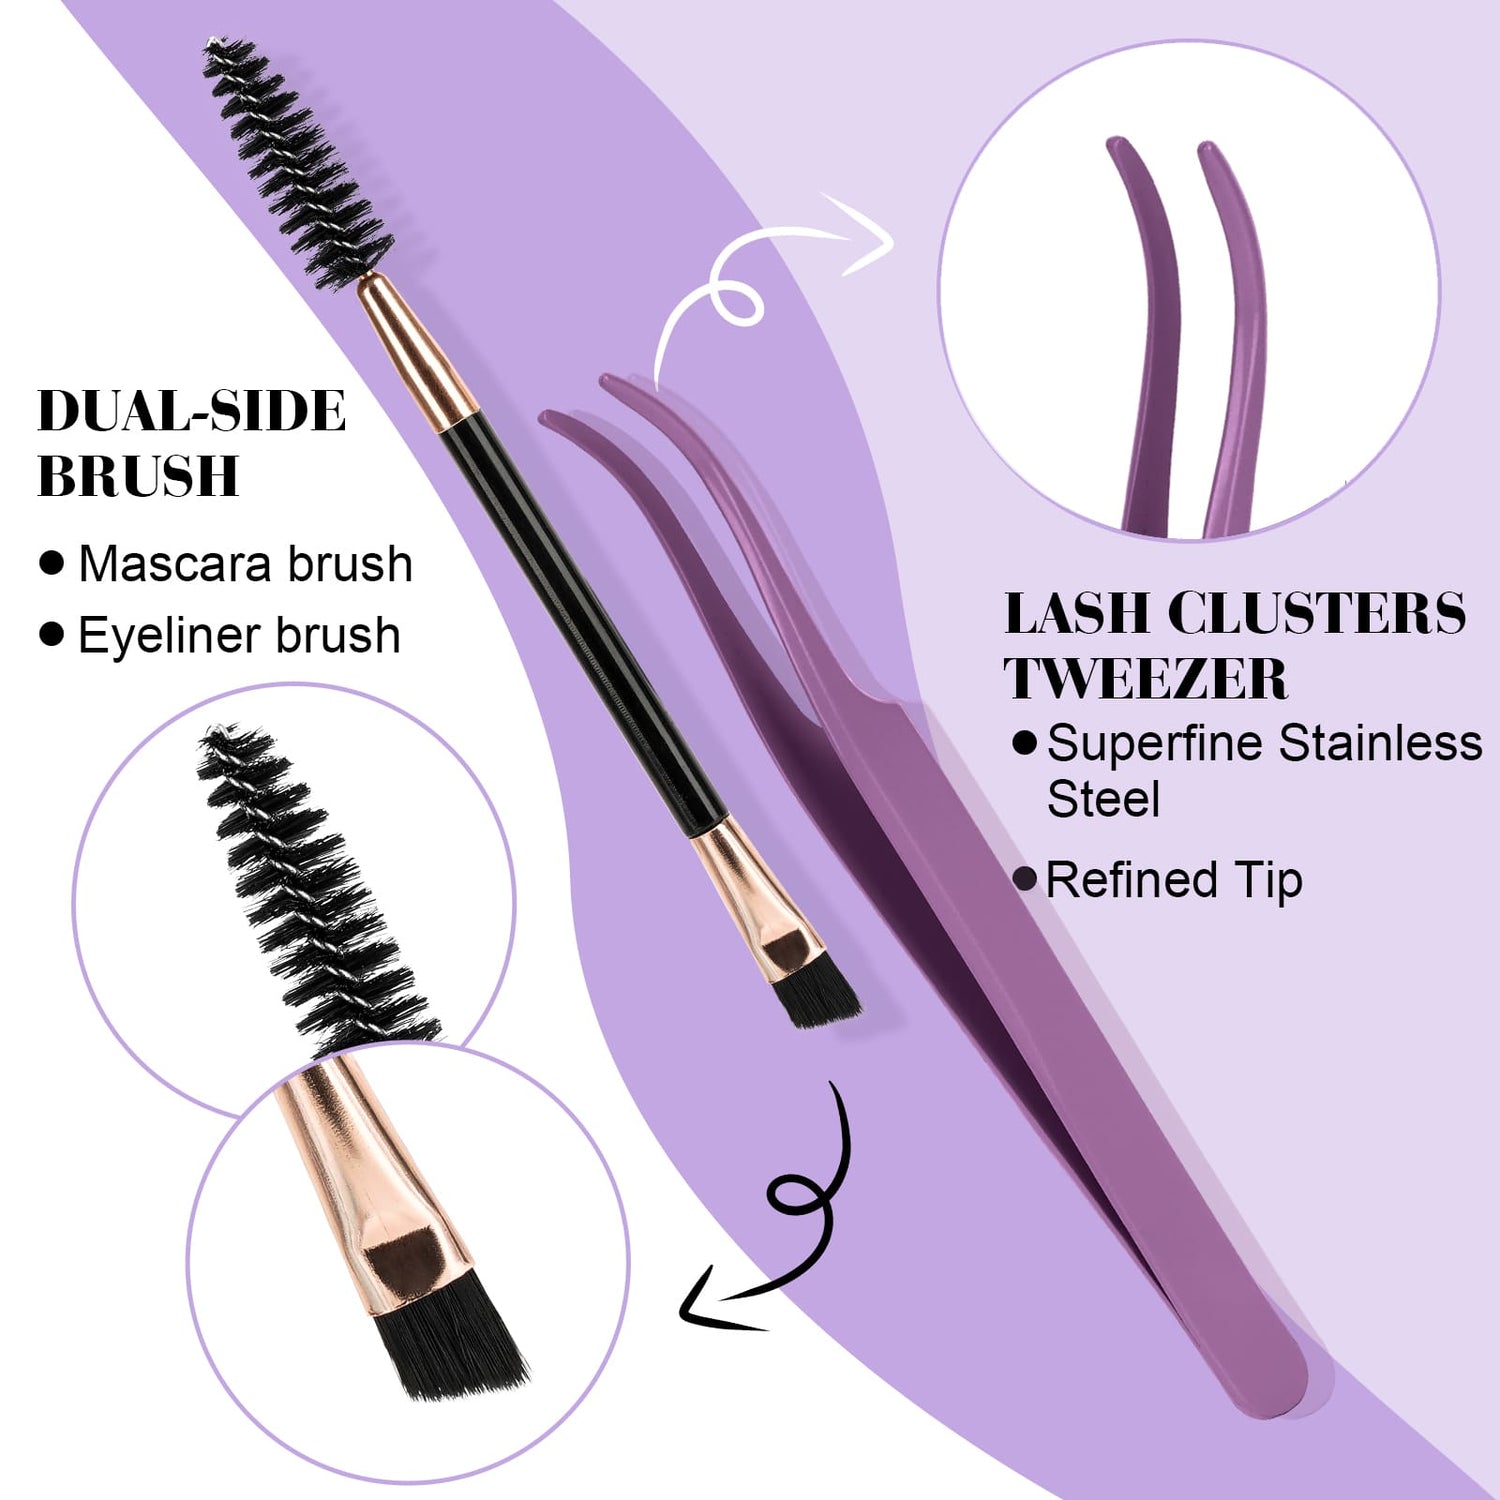 Dual-side brush and purple tweezer for diy lashes